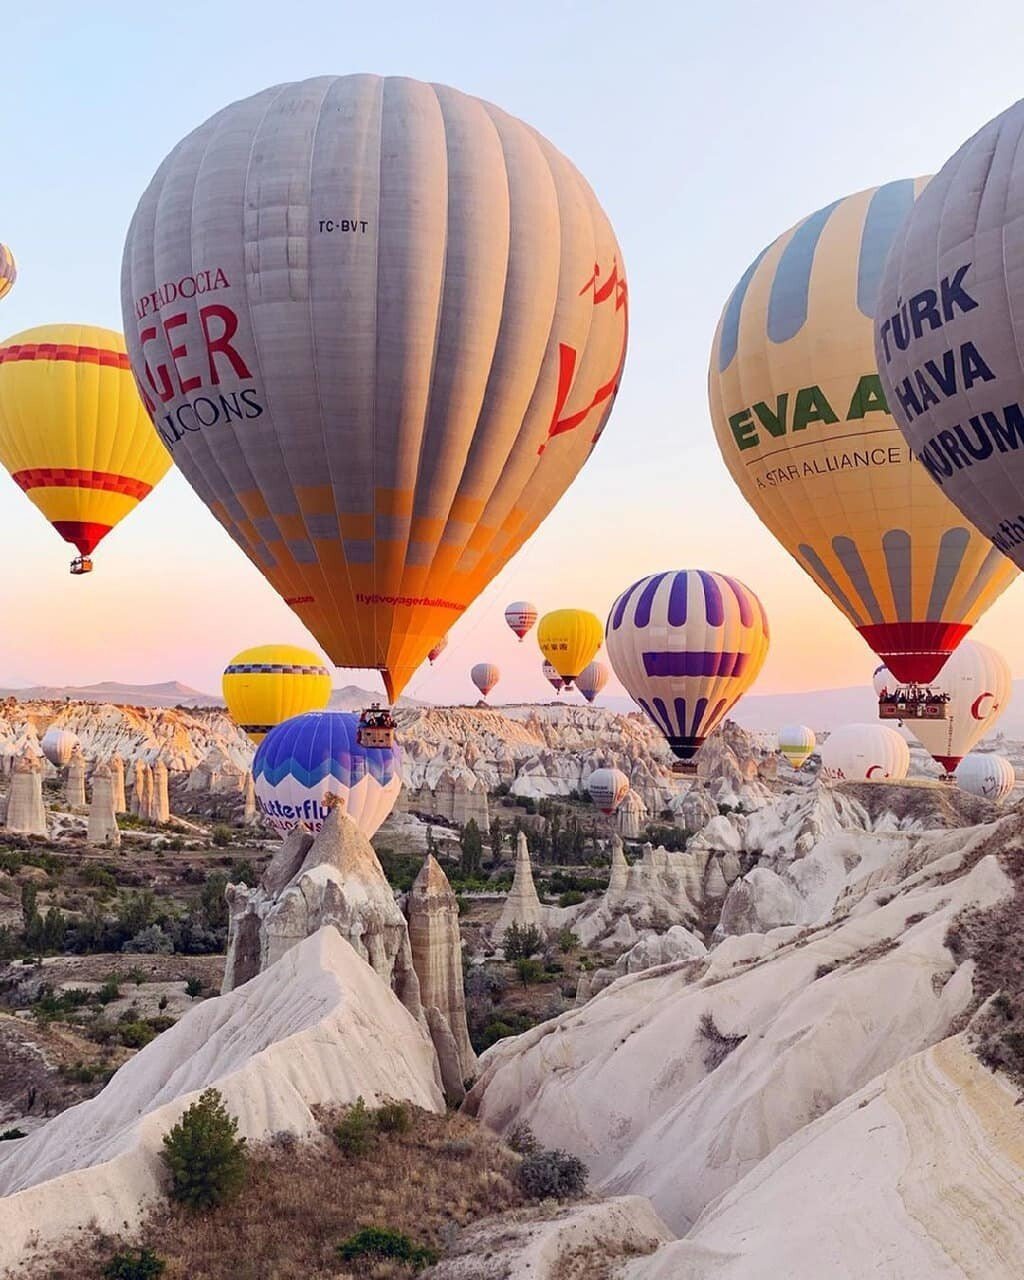 With colourful hot-air balloons flying above volcaniclastic rocks, Cappadocia is a true fairy tale scenery. Photo: @goreme_cappadocia/Instagram